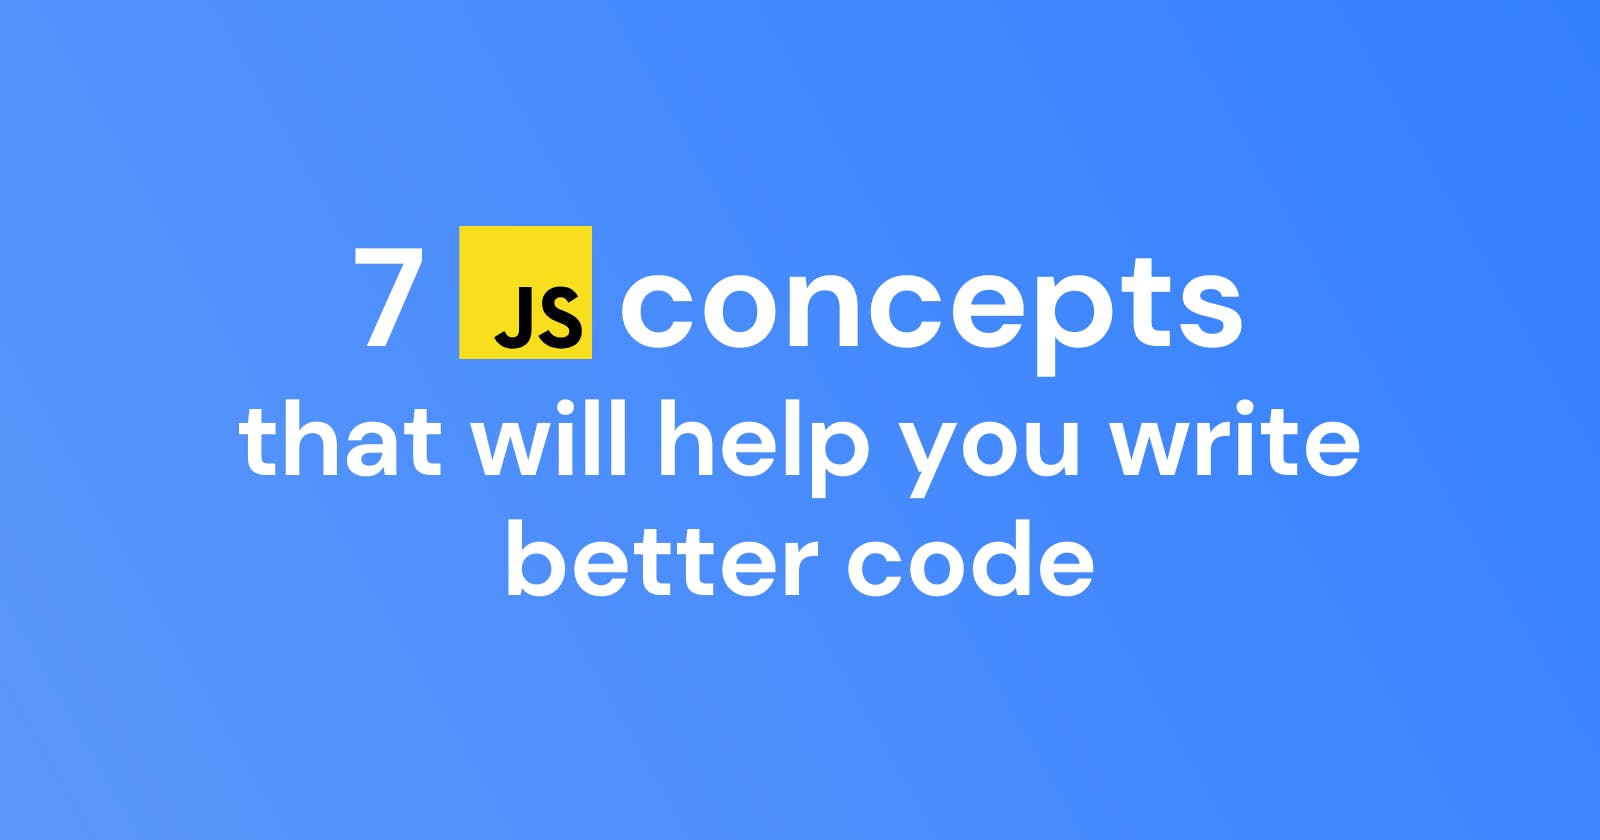 7 small Javascript concepts that can make a BIG difference